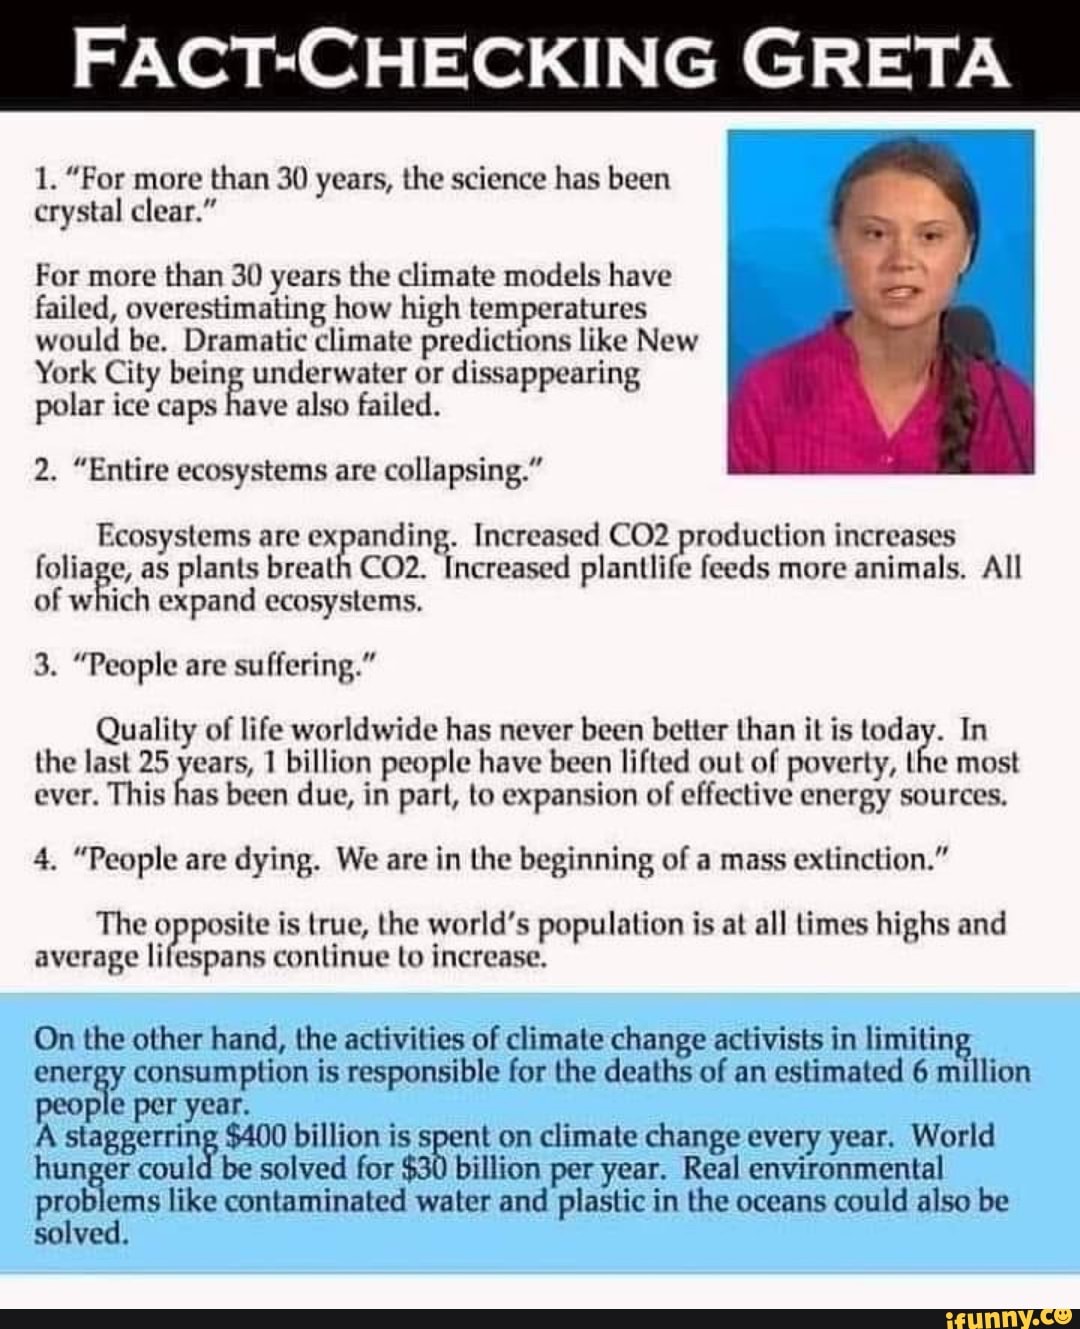 FACT-CHECKING GRETA
I. "For more than 30 years, lhe science has been
crystal clear.”
For more
than 30 years the climate models have
failed, overesﬁmaling how high temperatures
would be. Dramatic climate predictions like New
York City bein underwater or disappearing
polar ice caps ave also failed.
2. "Entire ecosystems arc collapsing."
Ecosystems arc
eannding. Increased C02 produclion increases
folia c, as planls breal C02. Increased planllil'e feeds more animals. All
nf w
ich expand ecosyslems.
3. ”People are suffering.”
Quality of life worldwide has never
been bcllcr lhan ll is [nda
.
ln
lhc lasl 25 cars, I billion people have been lifted nul nf pnvcrly, l 9 mos!
ever.
This as
been due, in parl, lo expansion of effective energy sources.
4. "People are dying. We are in lhc beginning of a mass extinction."
The 0 posilc is lrue, lhc world's population is al all limes highs and
average II espans continue lo increase.
On the other hand, the activities of climate change activists in limitin
ener consumption is responsible for the deaths of an
estimated 6 million
peop e per year.
A staggerrin $400 billion is s nt on climate change every year. World
hun er cou] be solved for billion peryear. Real environmental
prlobeãms like contaminated water and plastic in the oceans
could also be
so v
.